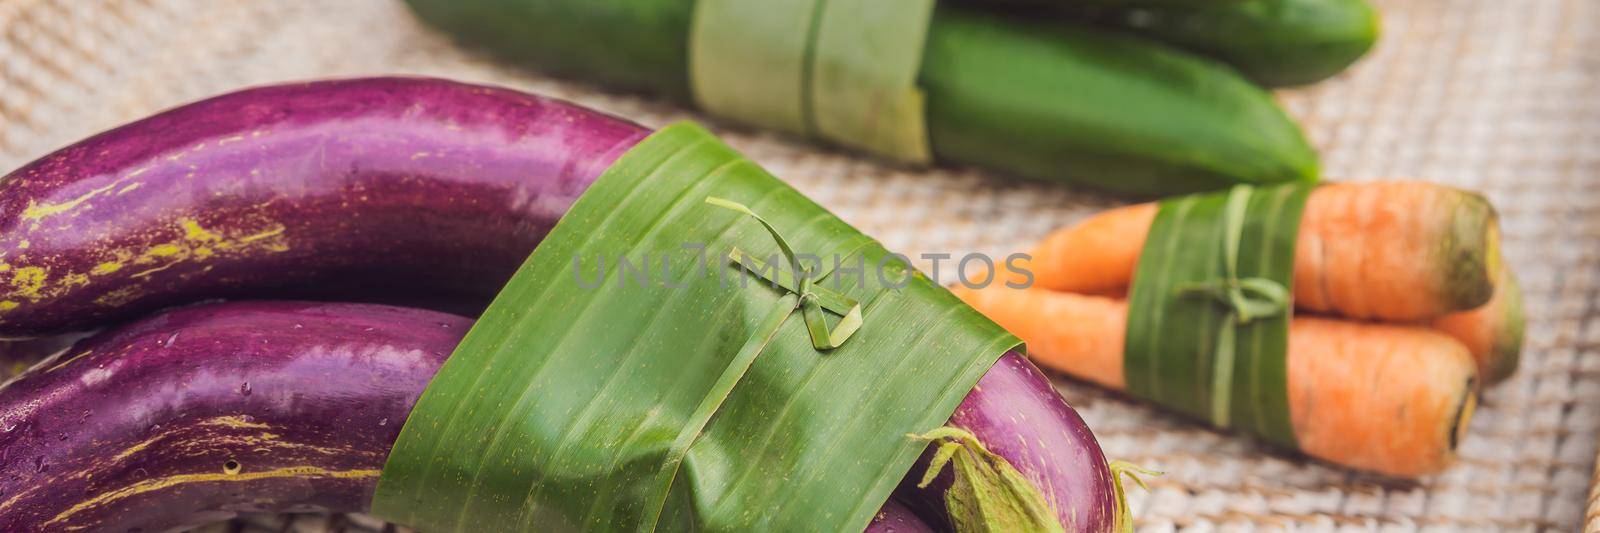 BANNER, LONG FORMAT Eco-friendly product packaging concept. Vegetables wrapped in a banana leaf, as an alternative to a plastic bag. Zero waste concept. Alternative packaging by galitskaya